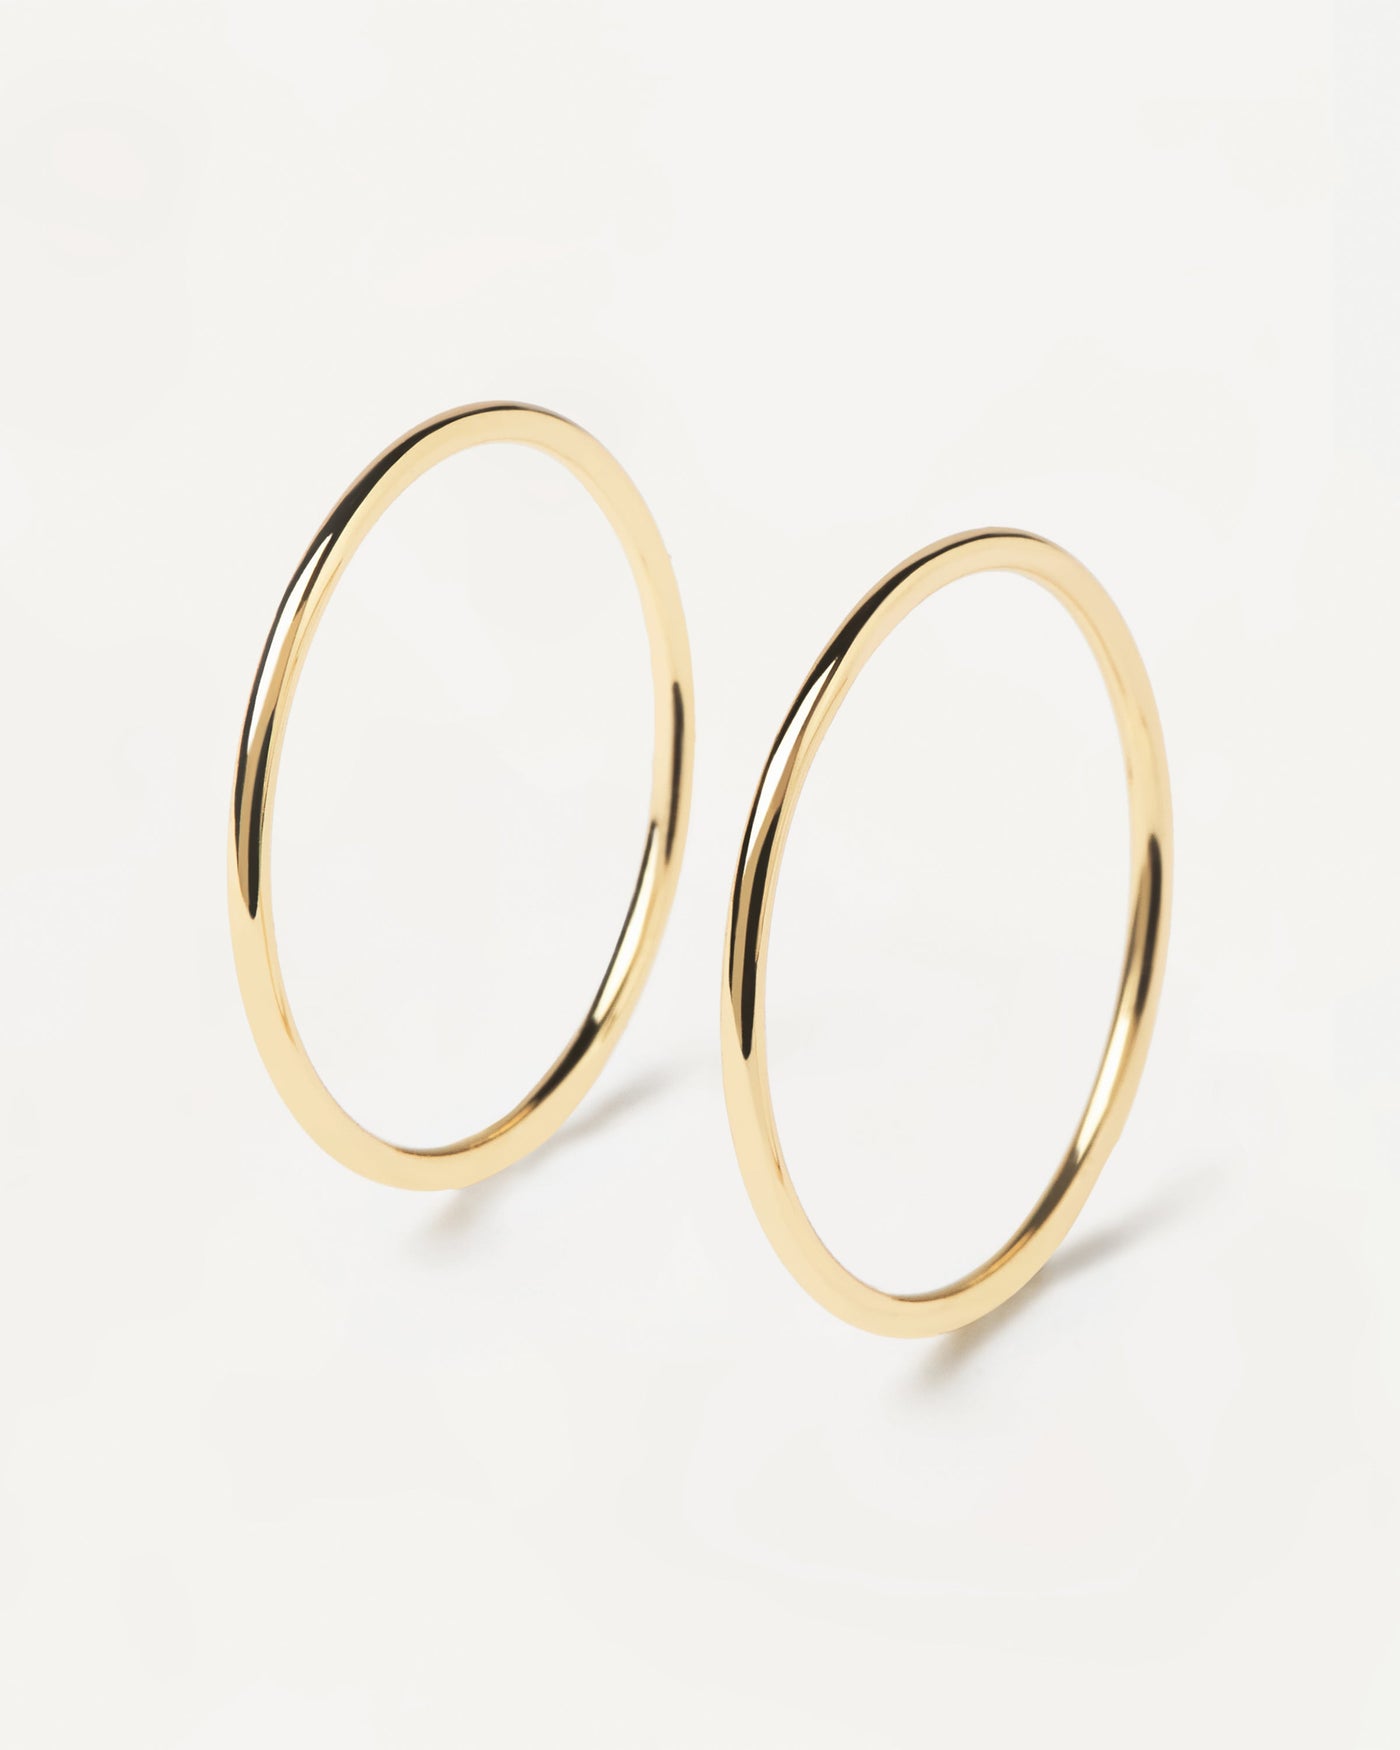 2023 Selection | Twin Rings. Pair of stackable 18k gold plated silver rings . Get the latest arrival from PDPAOLA. Place your order safely and get this Best Seller. Free Shipping.